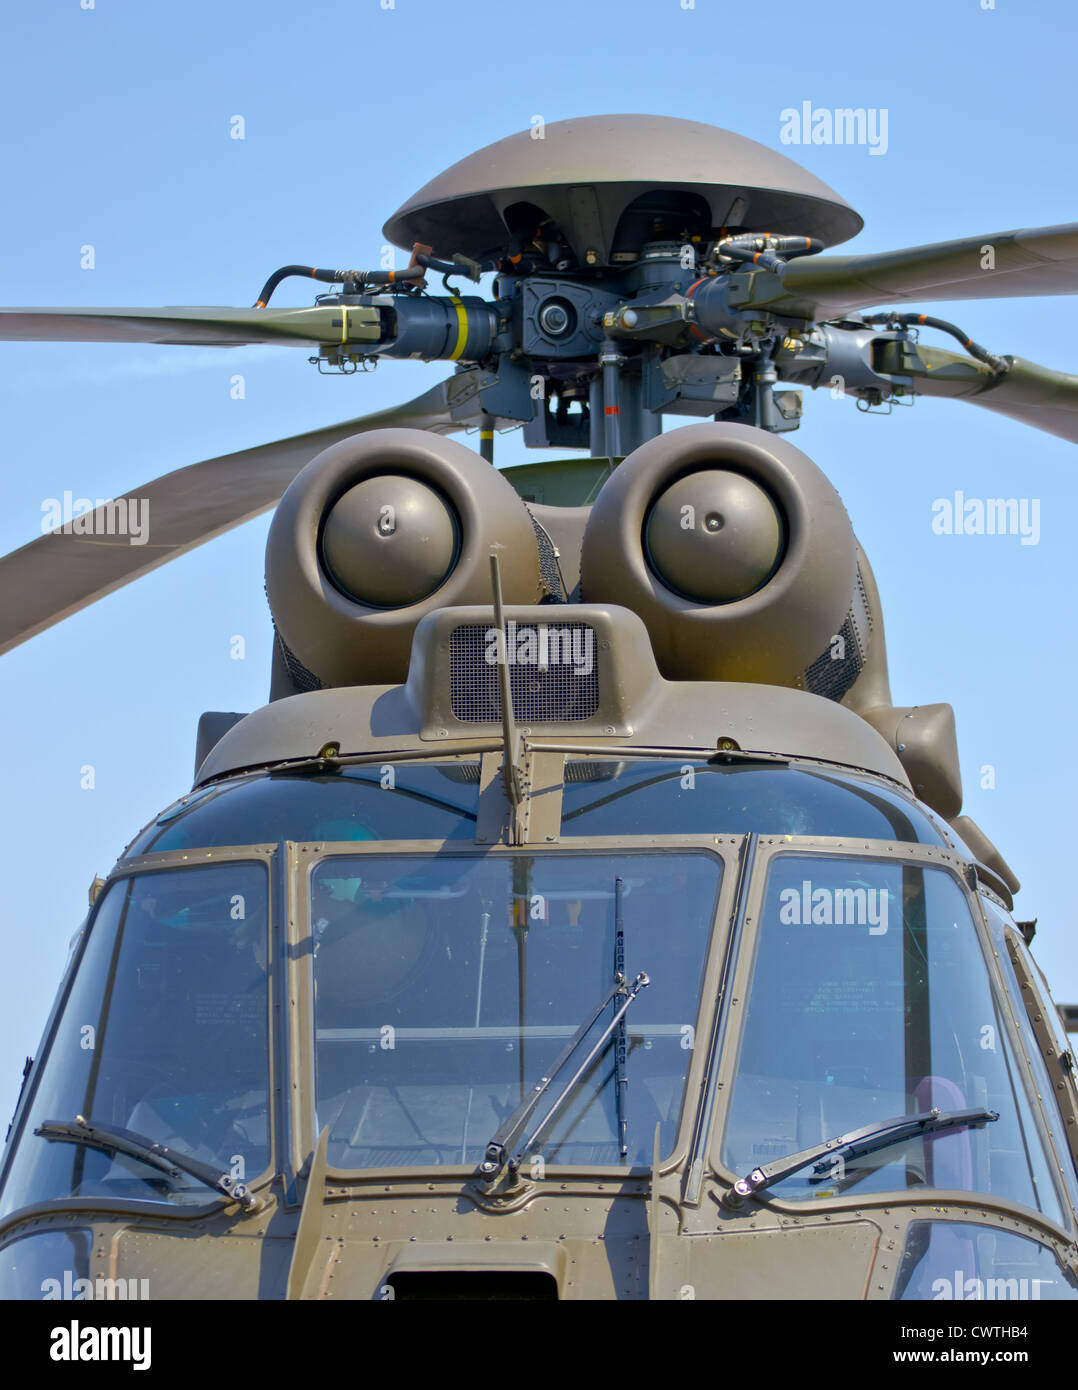 Close up front view of a military helicopter rotor hub and blades Stock Photo